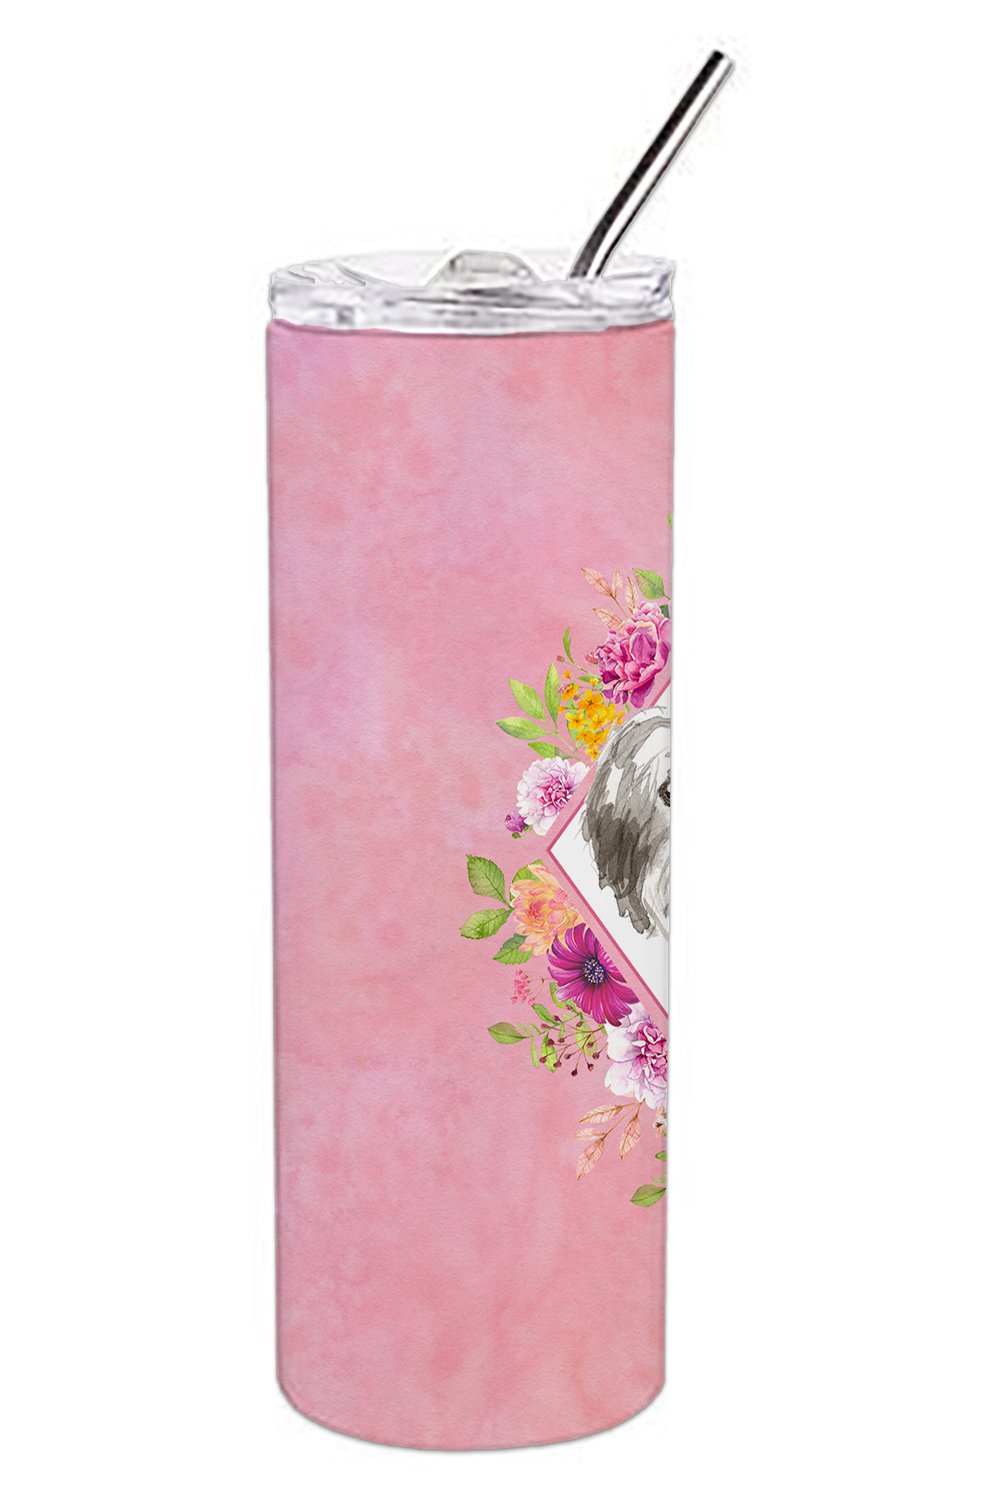 Shih Tzu Puppy Pink Flowers Double Walled Stainless Steel 20 oz Skinny Tumbler CK4211TBL20 by Caroline's Treasures